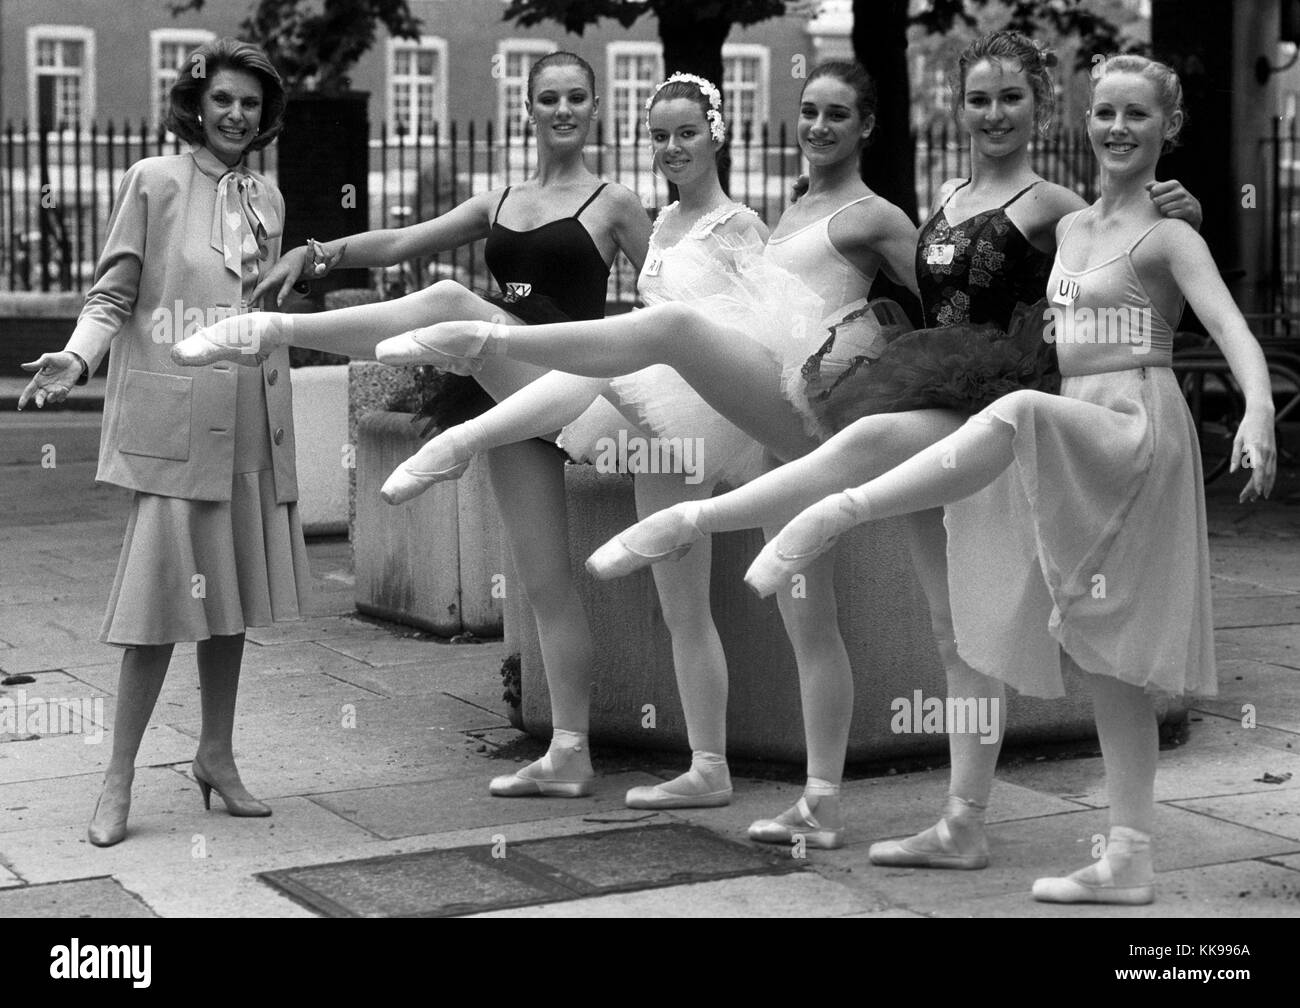 Famed Hollywood dancer Cyd Charisse (l), currently appearing in the musical 'Charlie Girl' at the Victoria Palace, outside Sadler's Wells Theatre, London, with classical ballerinas, (l-r) Clare Cattle, 16, Joanne Avison, 15, Jessica Clarke, 16, Helen Baxendale, 16, and Jacqueline Byrne, 18. The youngsters, finalists in the Classical category for the 1986 Cosmopolitan/Gamba Dance Award staged at the Wells, whose results will be announced later this evening. Stock Photo